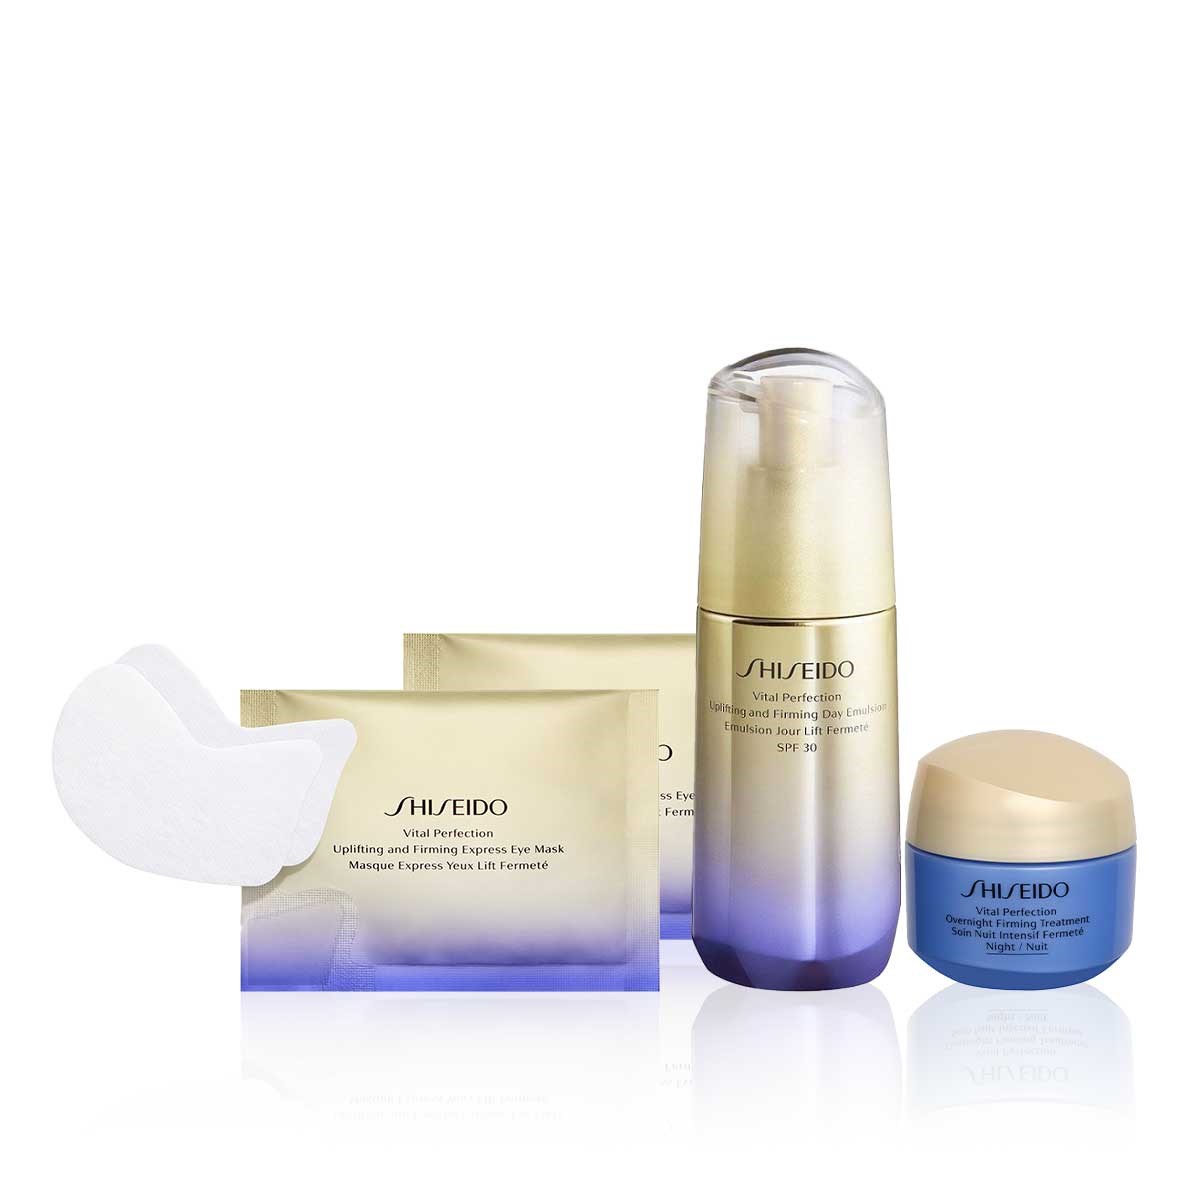 VITAL PERFECTION EXPRESS FIRMING SET 1